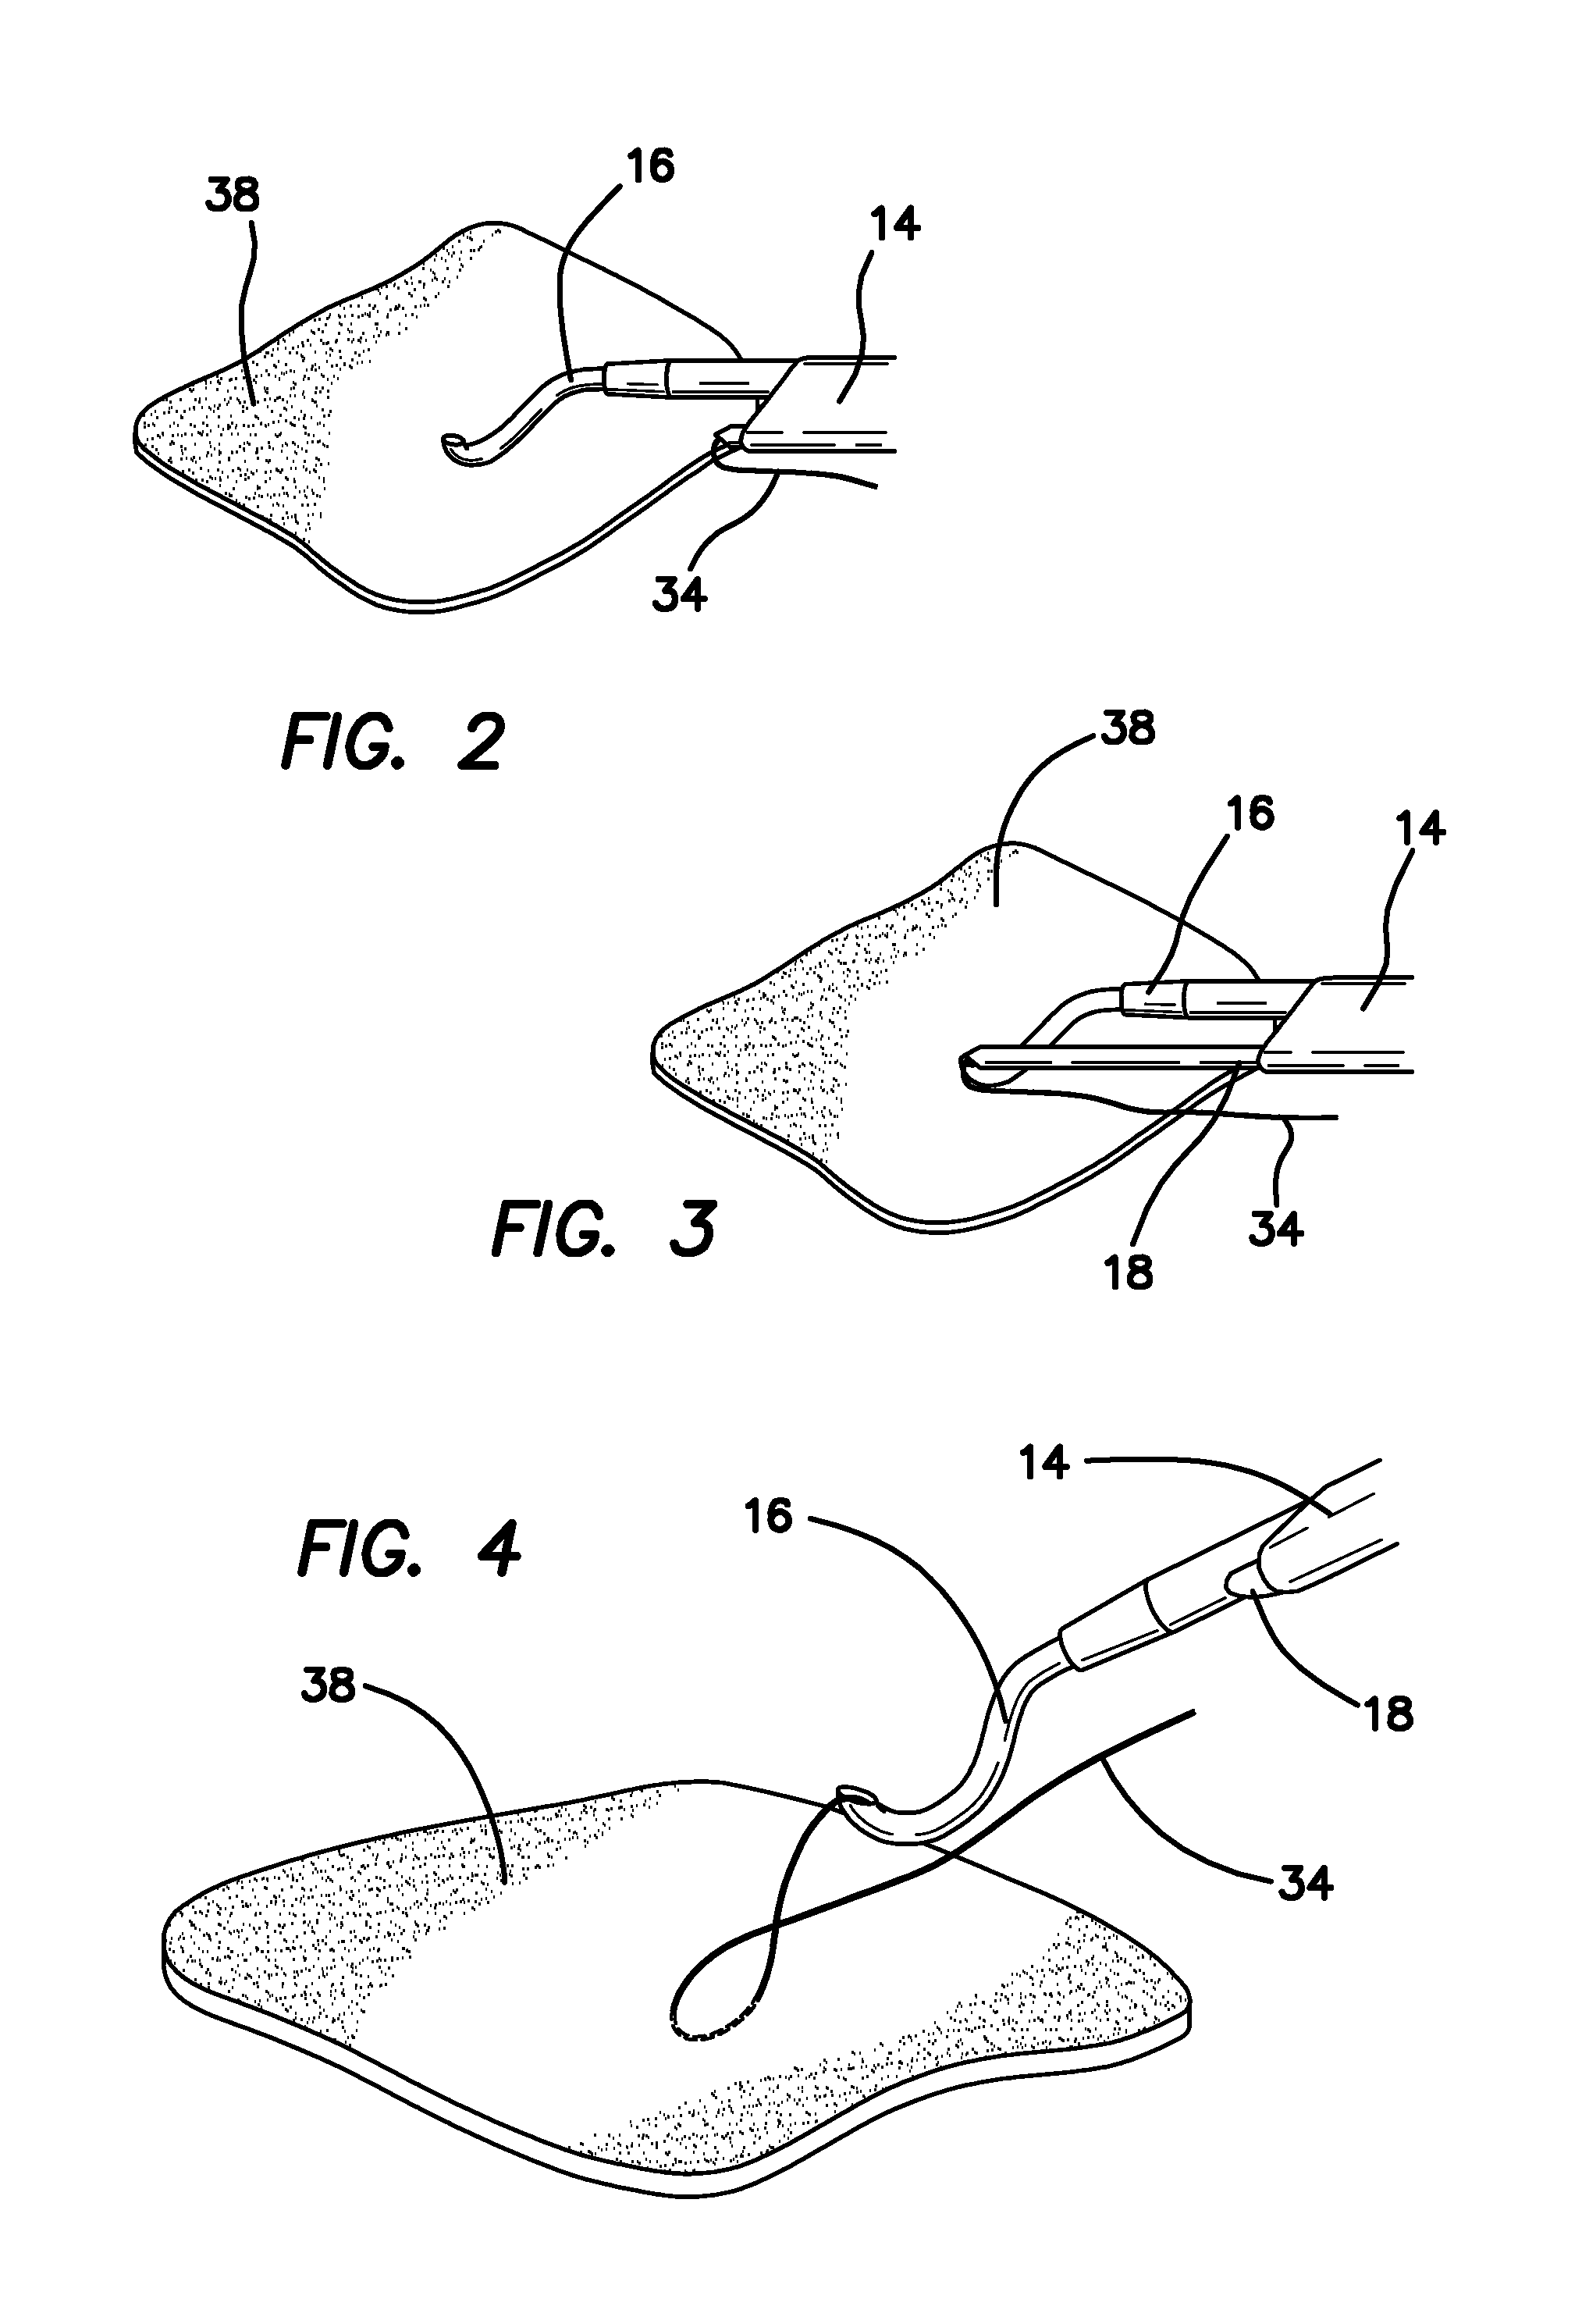 Arthroscopic suture passing devices and methods